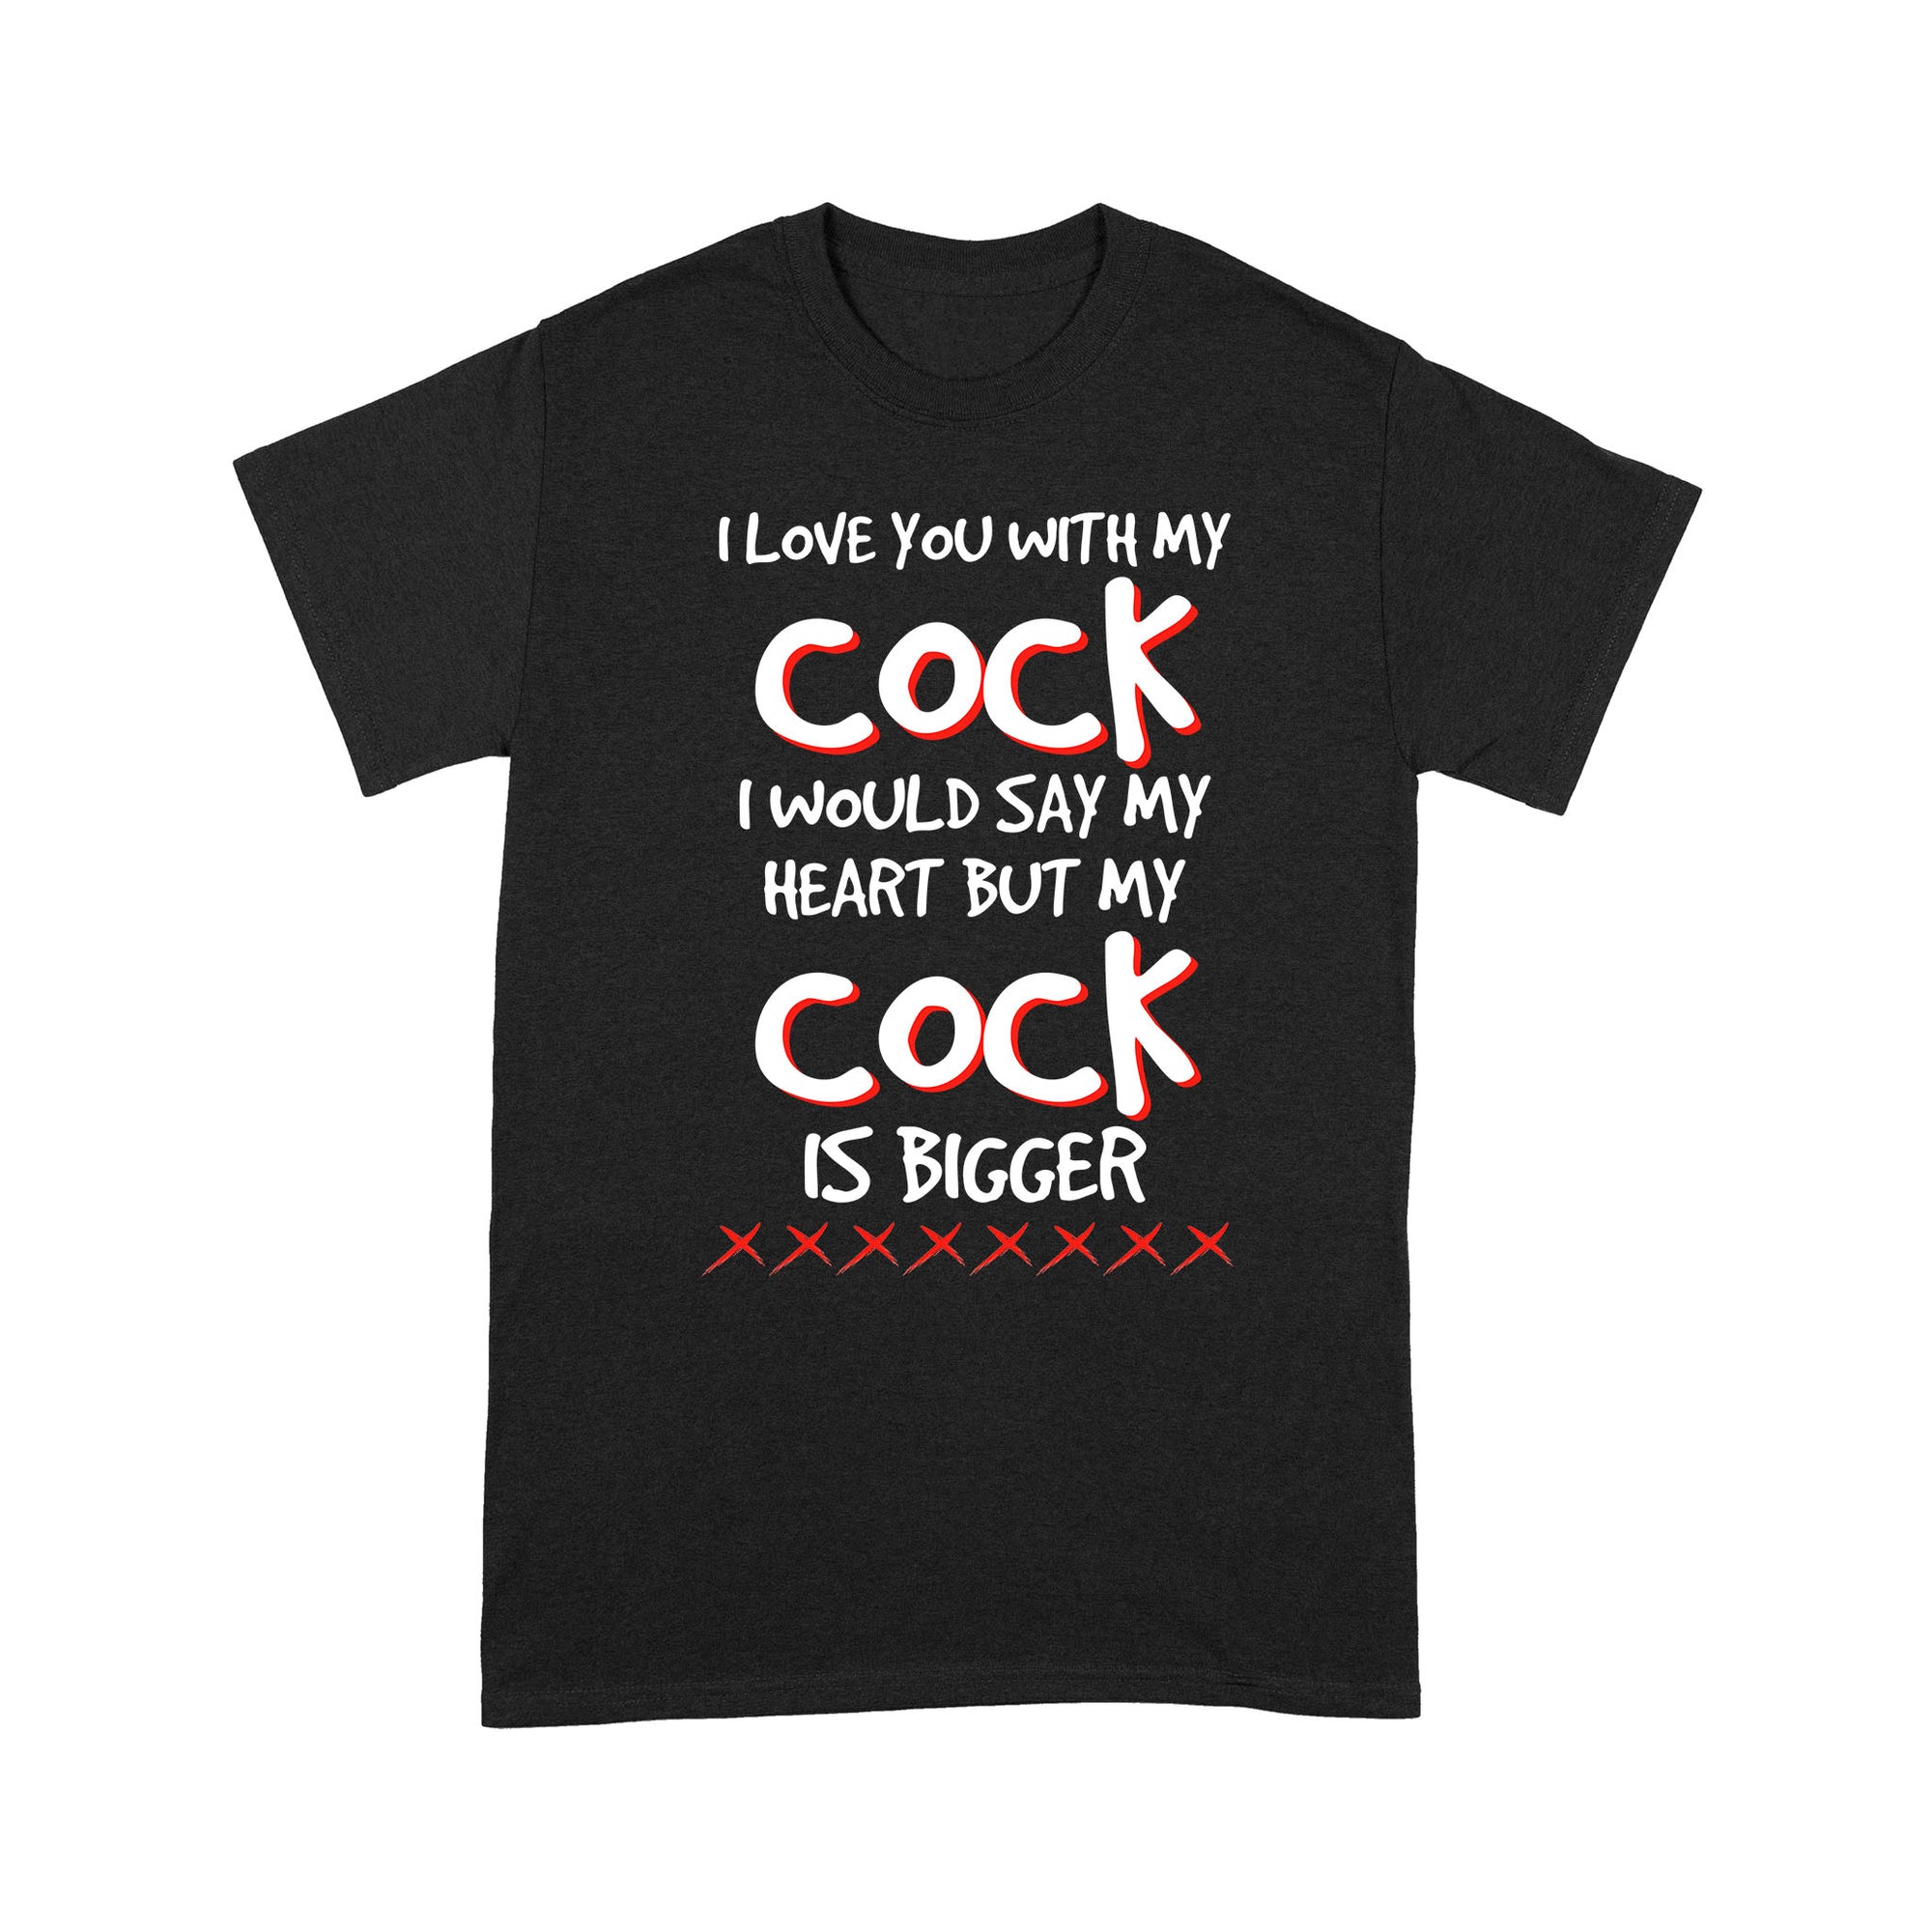 I Love You With My Cock I Would Say My Heart But My Cock Is Bigger Funny Gift Ideas For Men Boyfriend Husband - Standard T-shirt